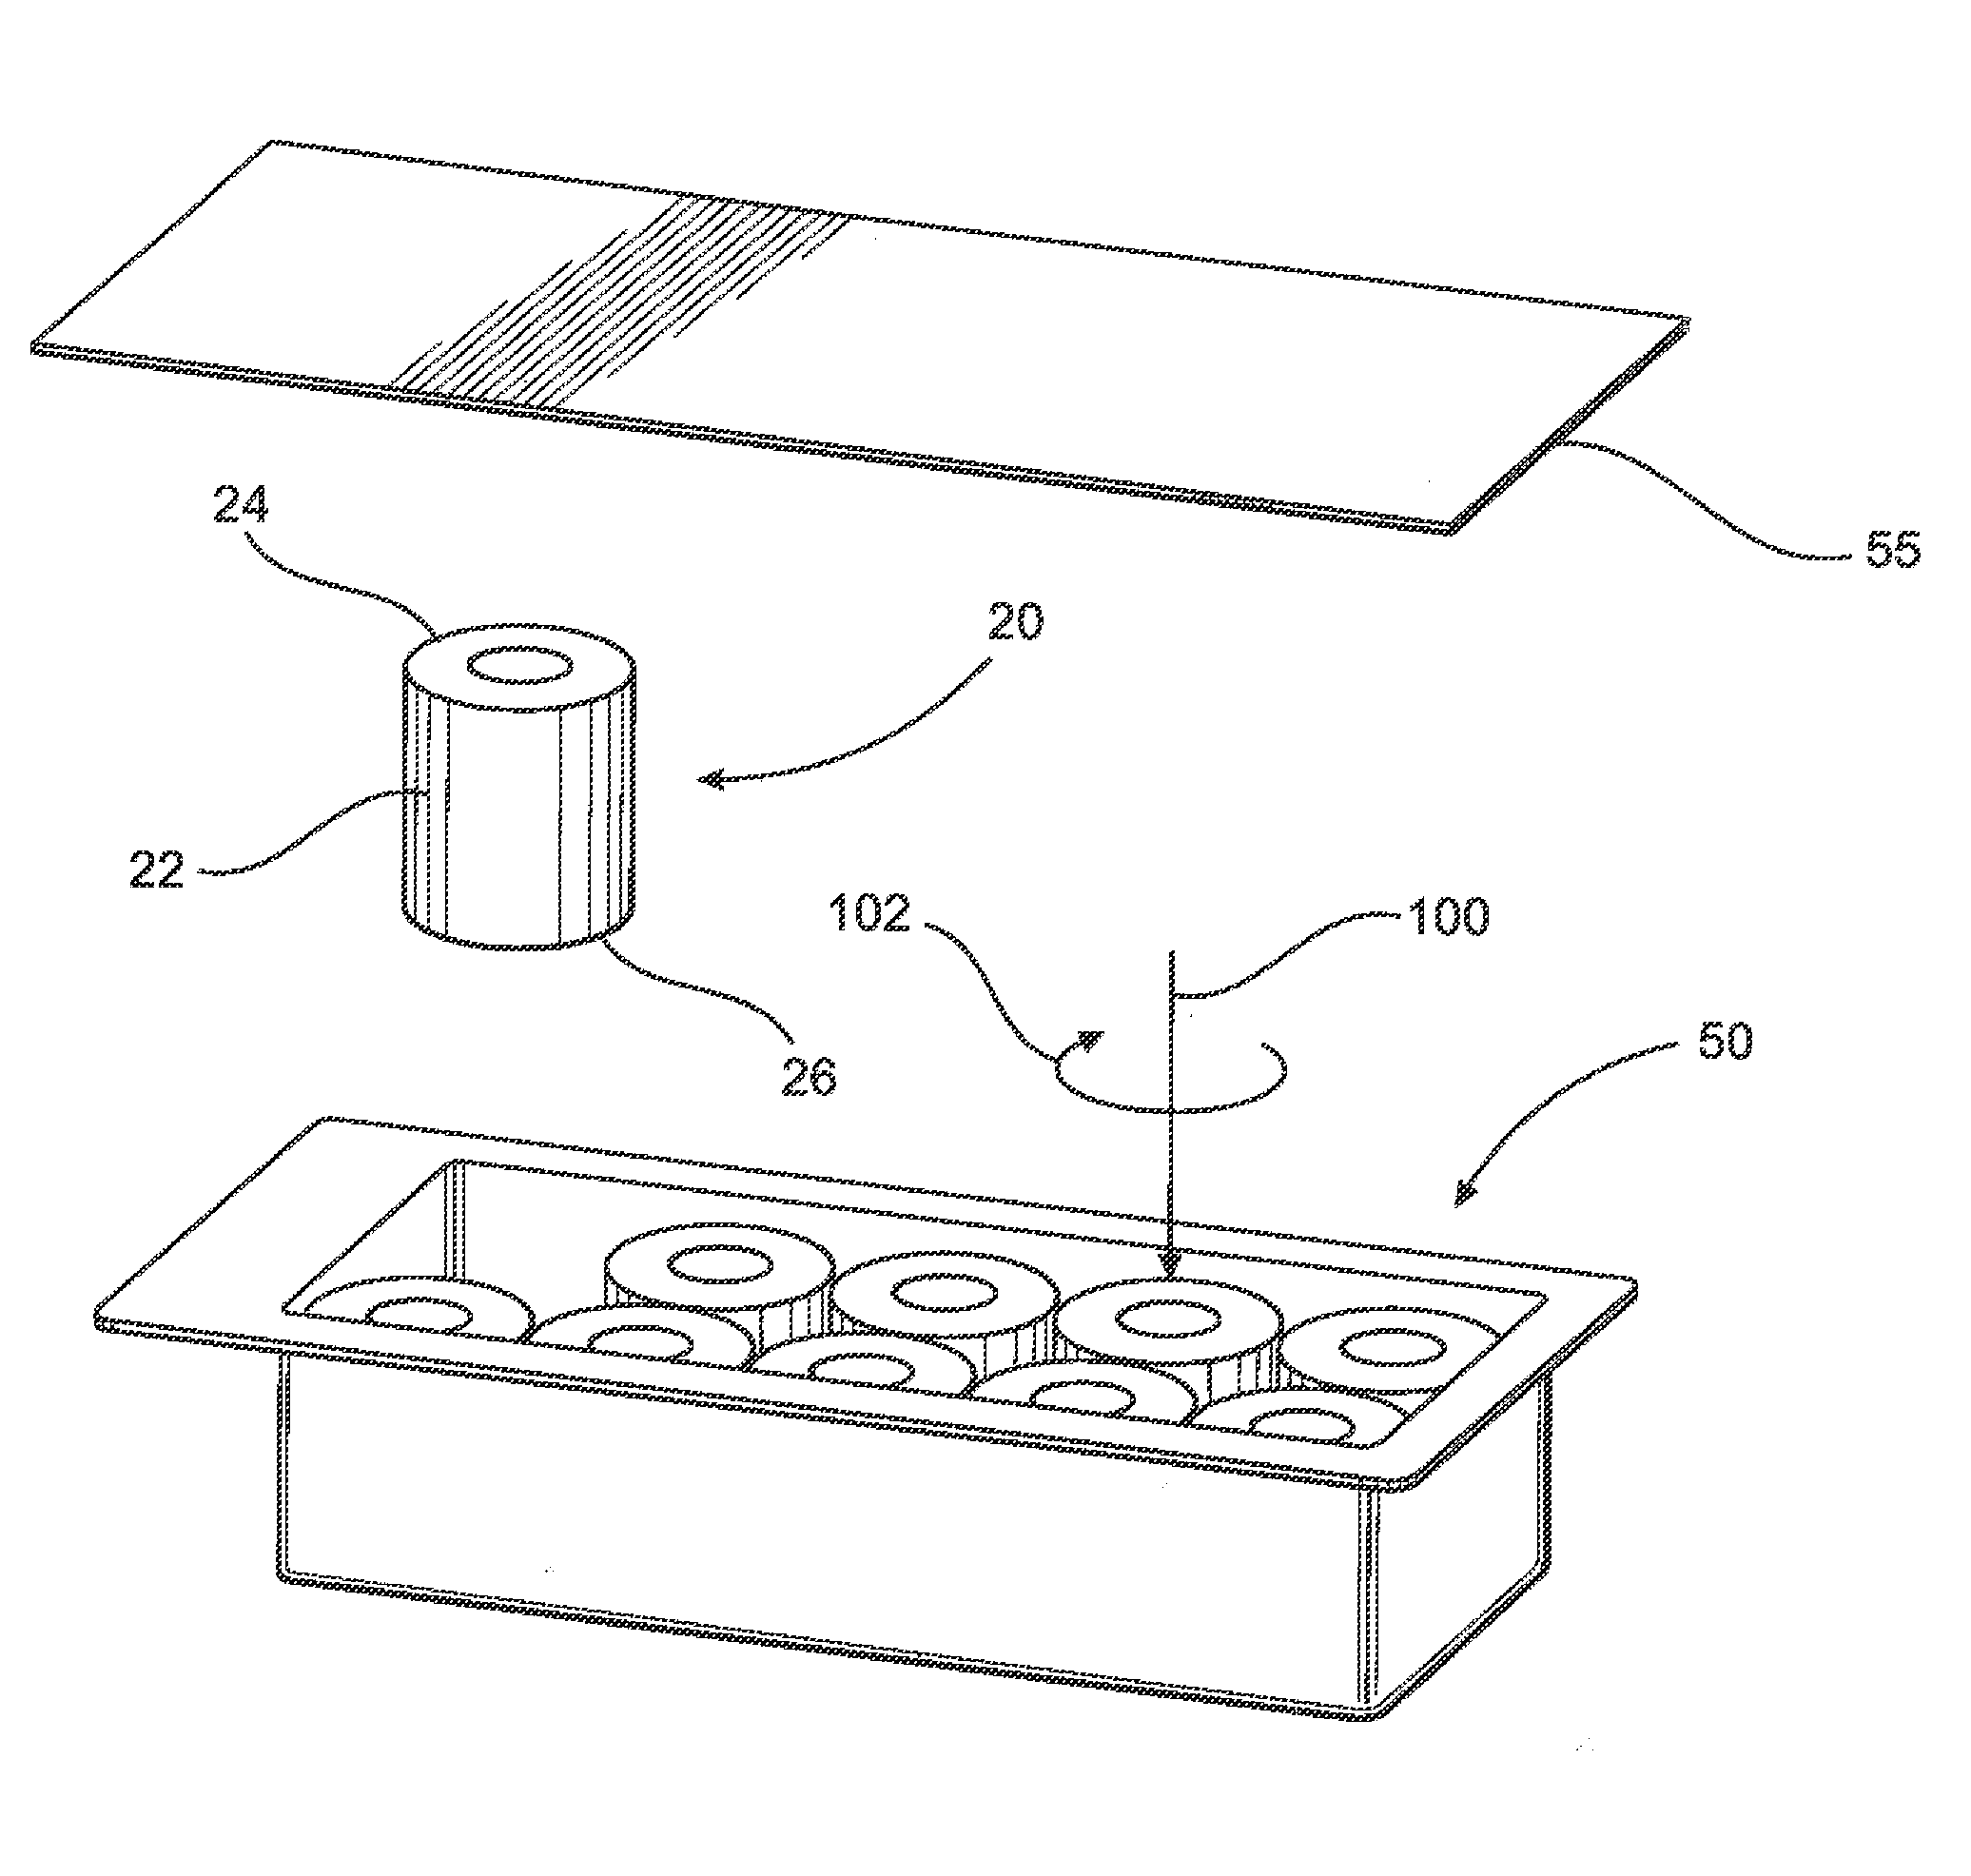 Assembly and system for connecting a closure to a syringe